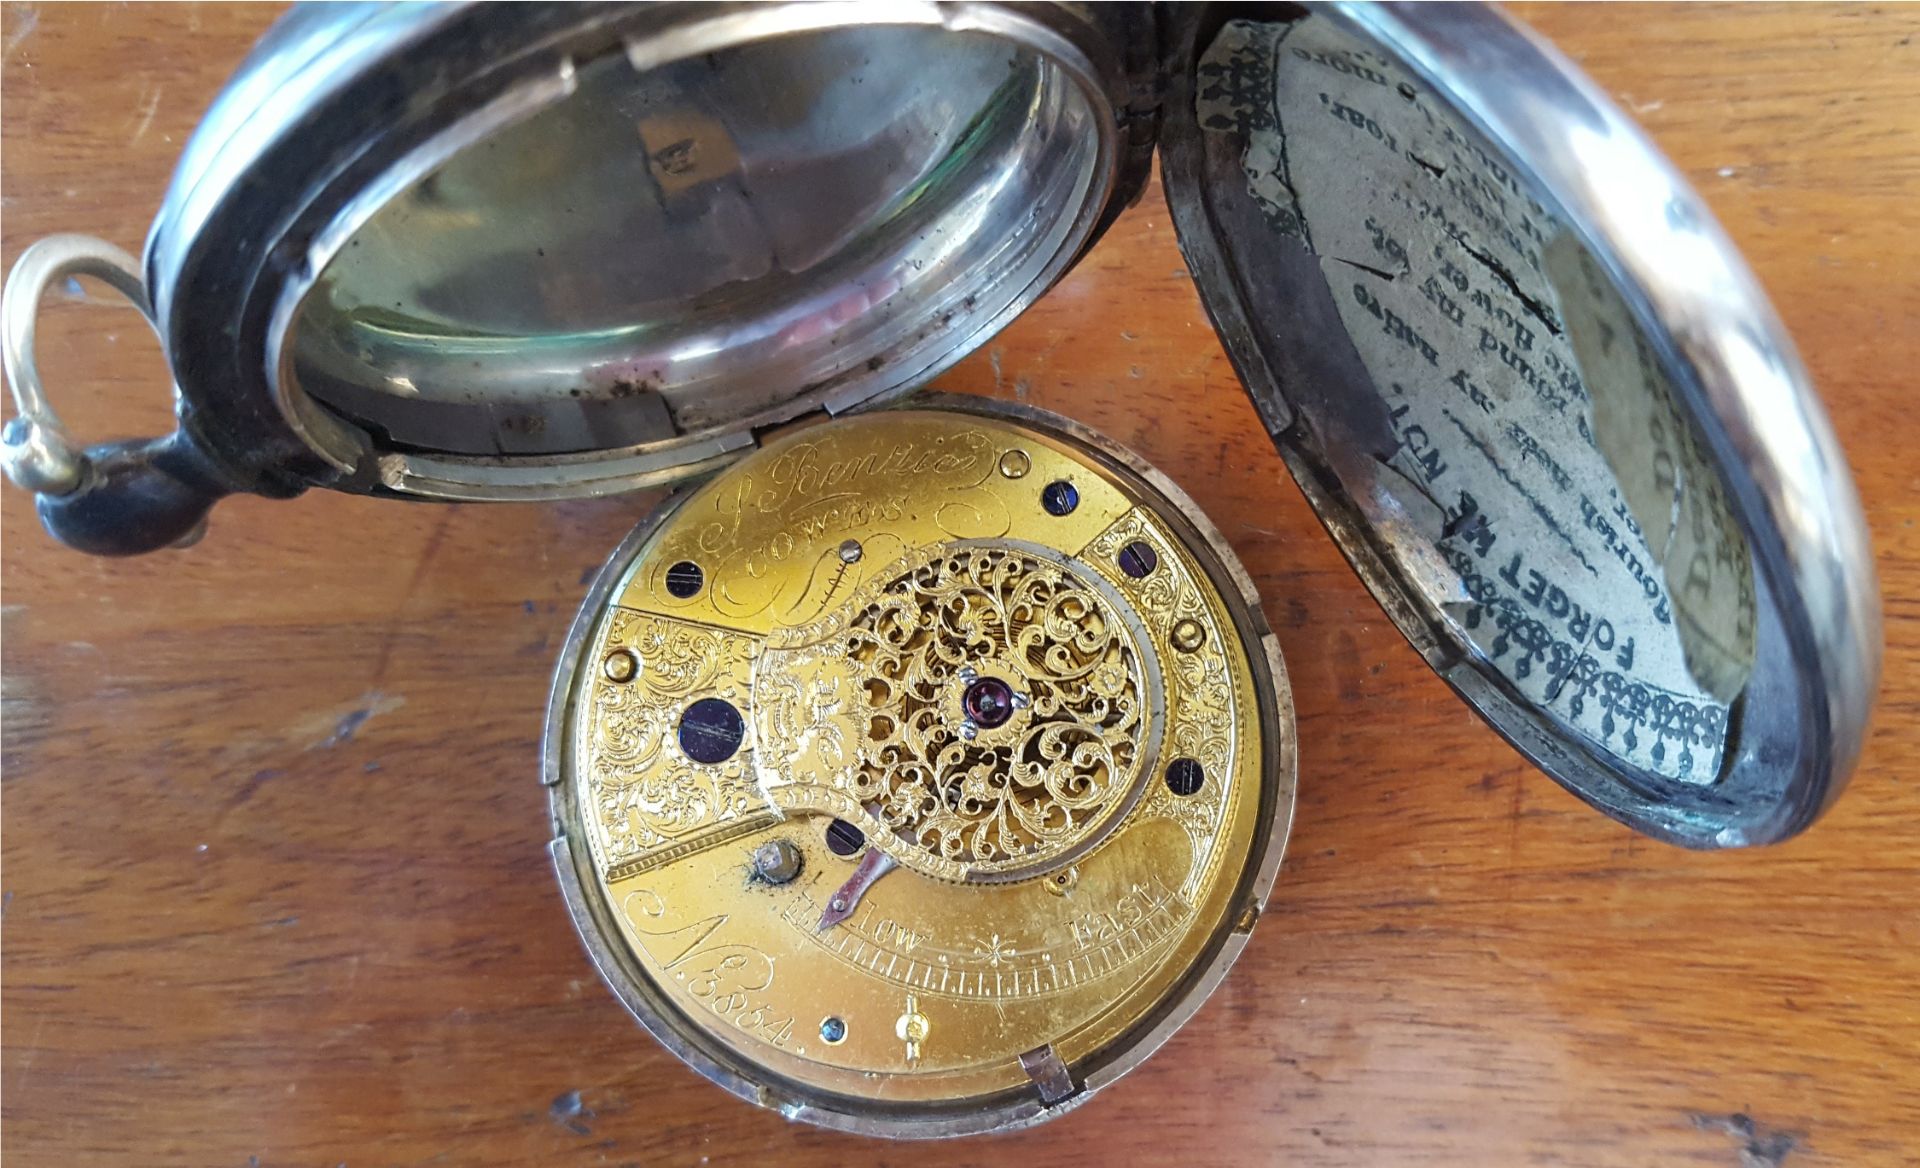 Antique S Benzies of Cowes Full Hunter Silver 935 Pocket Watch with Masonic Connections - Image 2 of 5